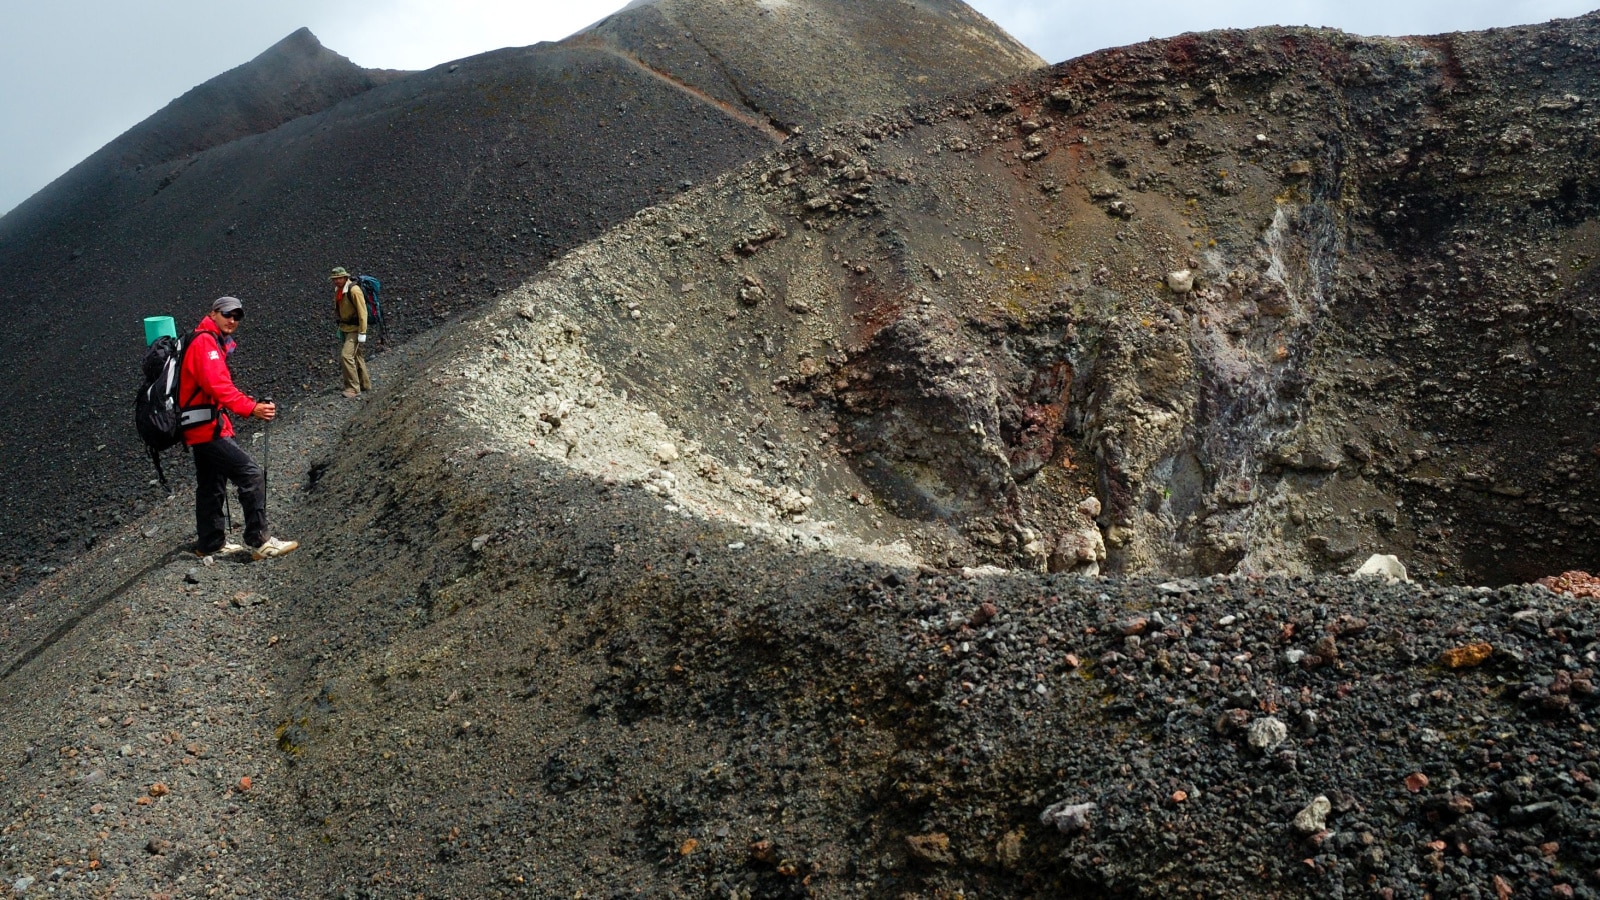 MOUNT CAMEROON, CAMEROON - CIRCA JUNE, 2008 - Two hikers from Europe resting near Mt.Cameroon volcano crater. Landscape is volcano ash covered by eruption that took place in 2000.